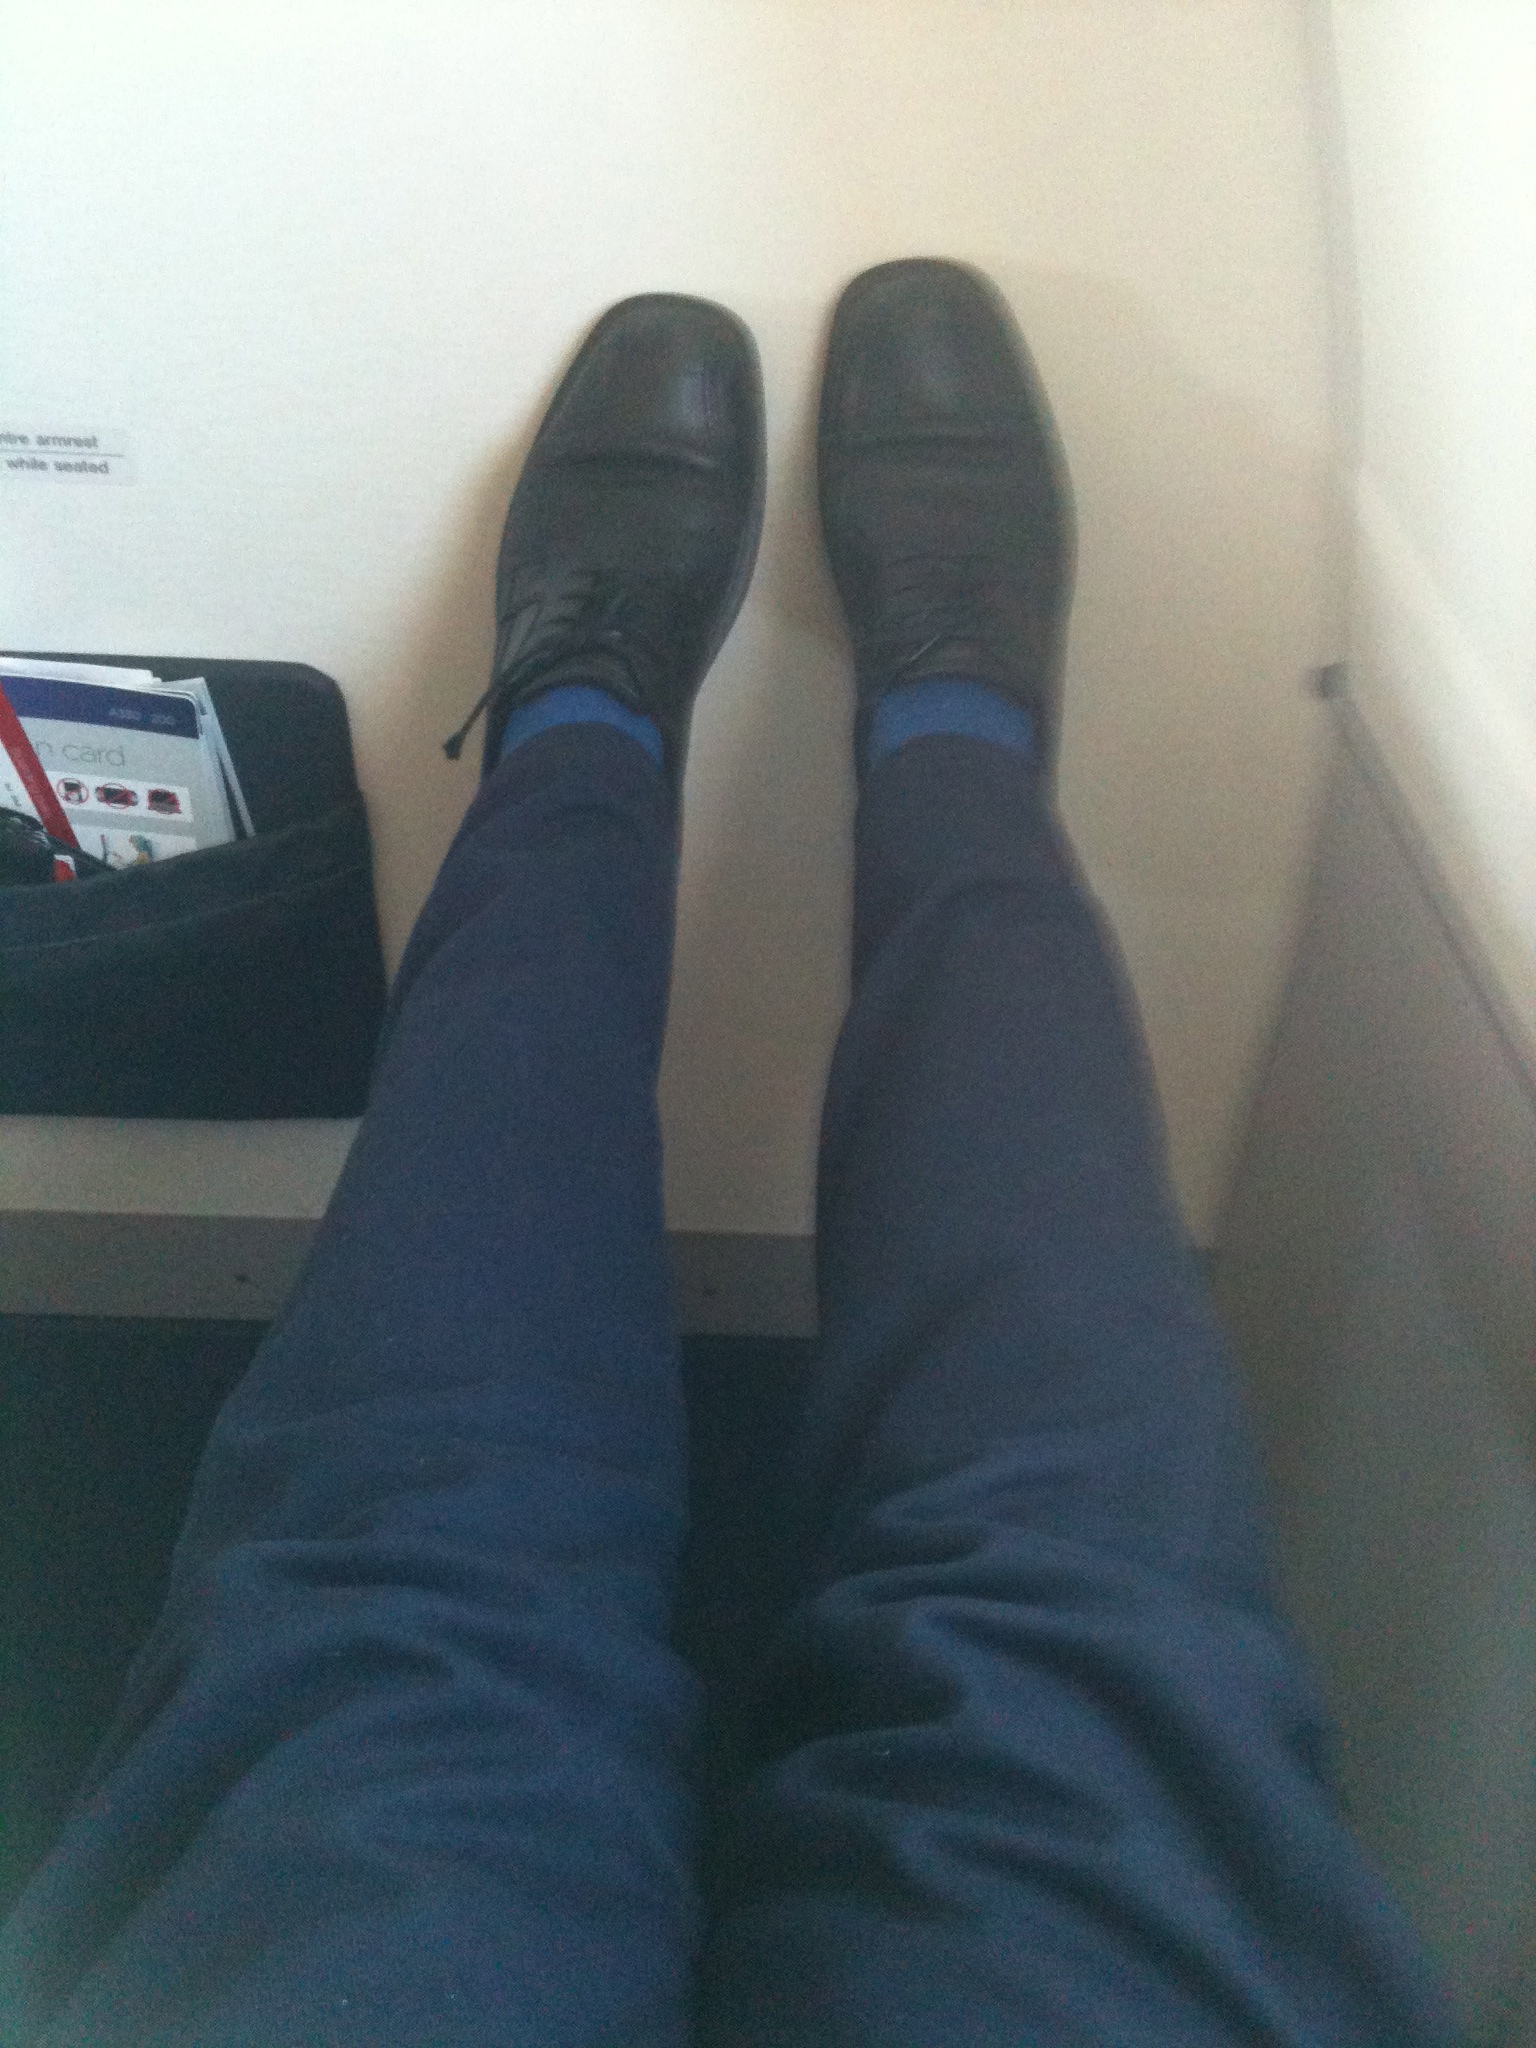 a person's legs and feet in blue pants